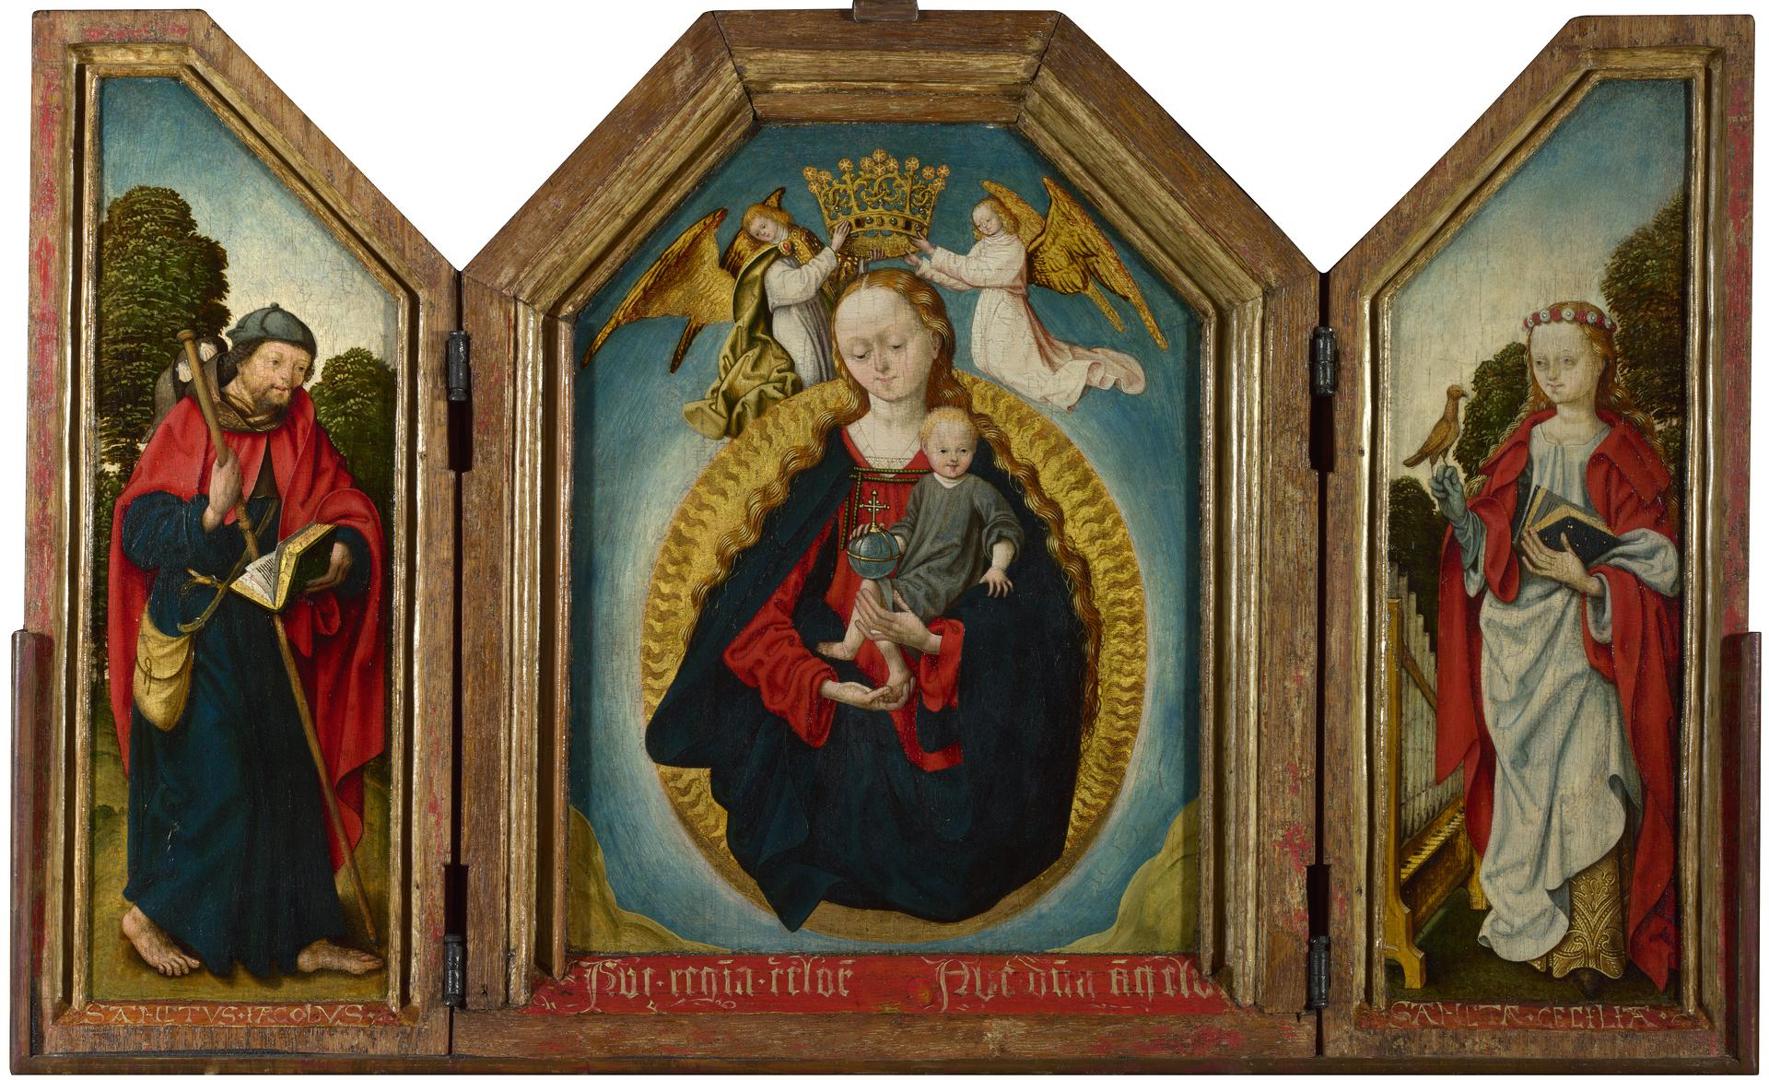 The Virgin and Child in Glory with Saints by Workshop of the Master of the Saint Bartholomew Altarpiece